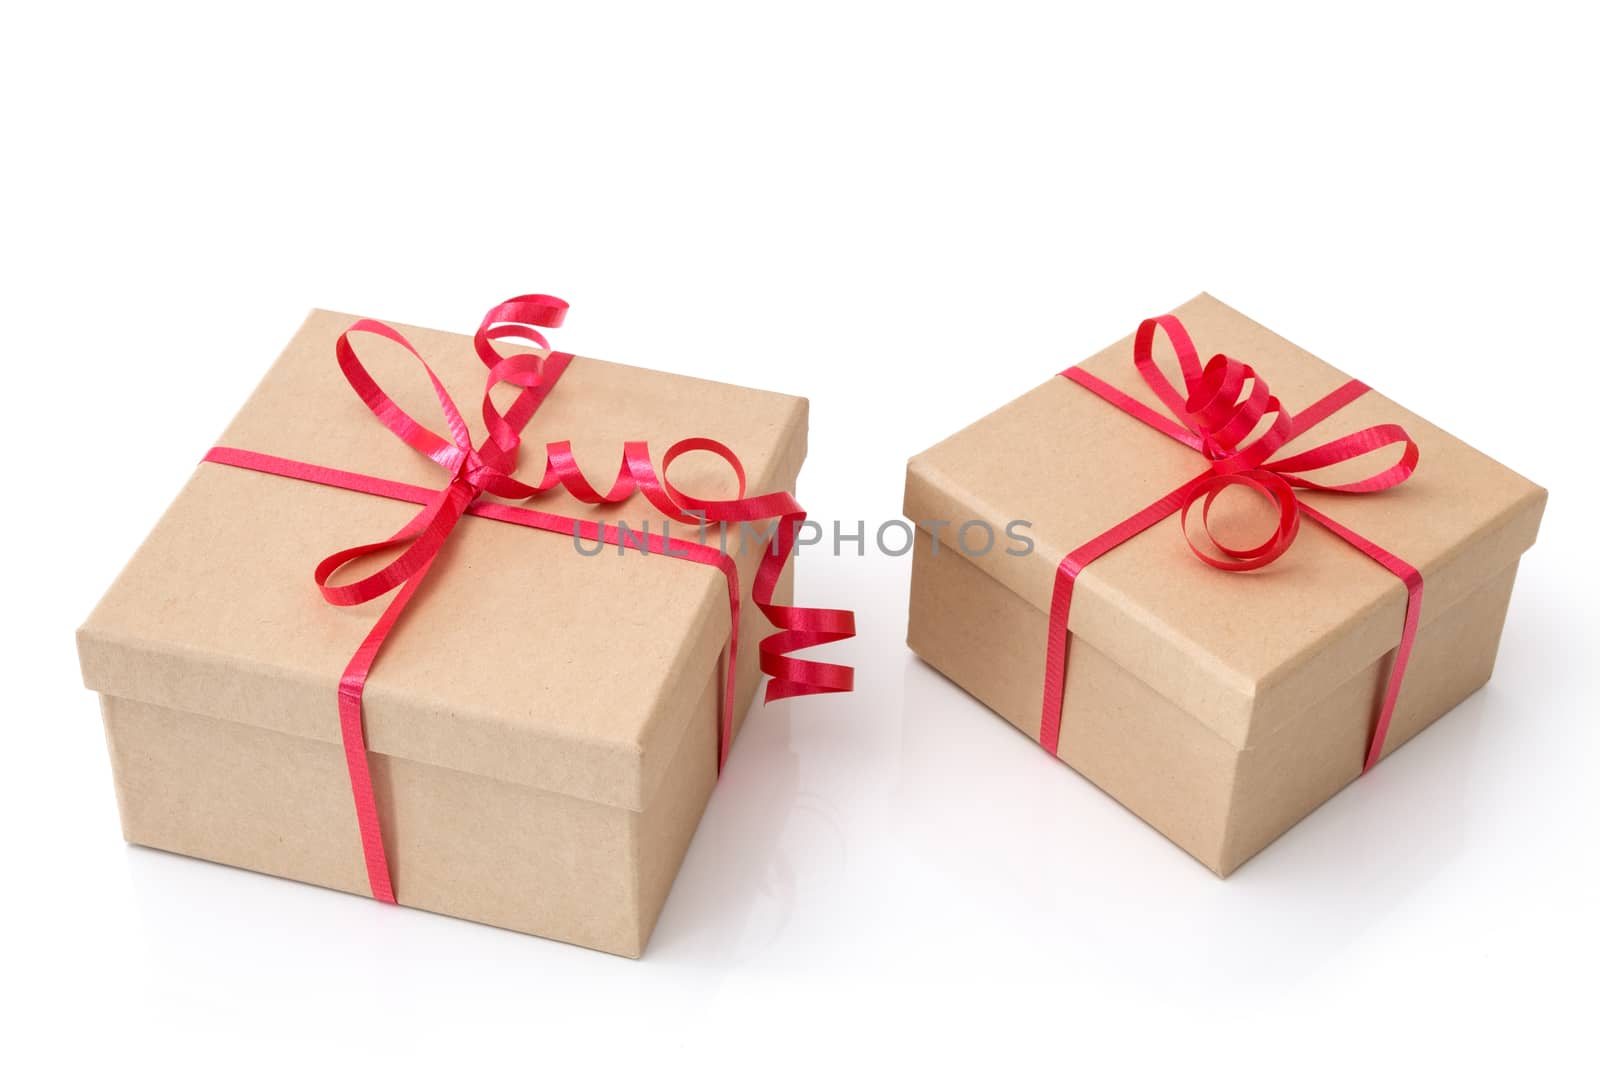 Two gift boxes with red ribbons on white background by anikasalsera